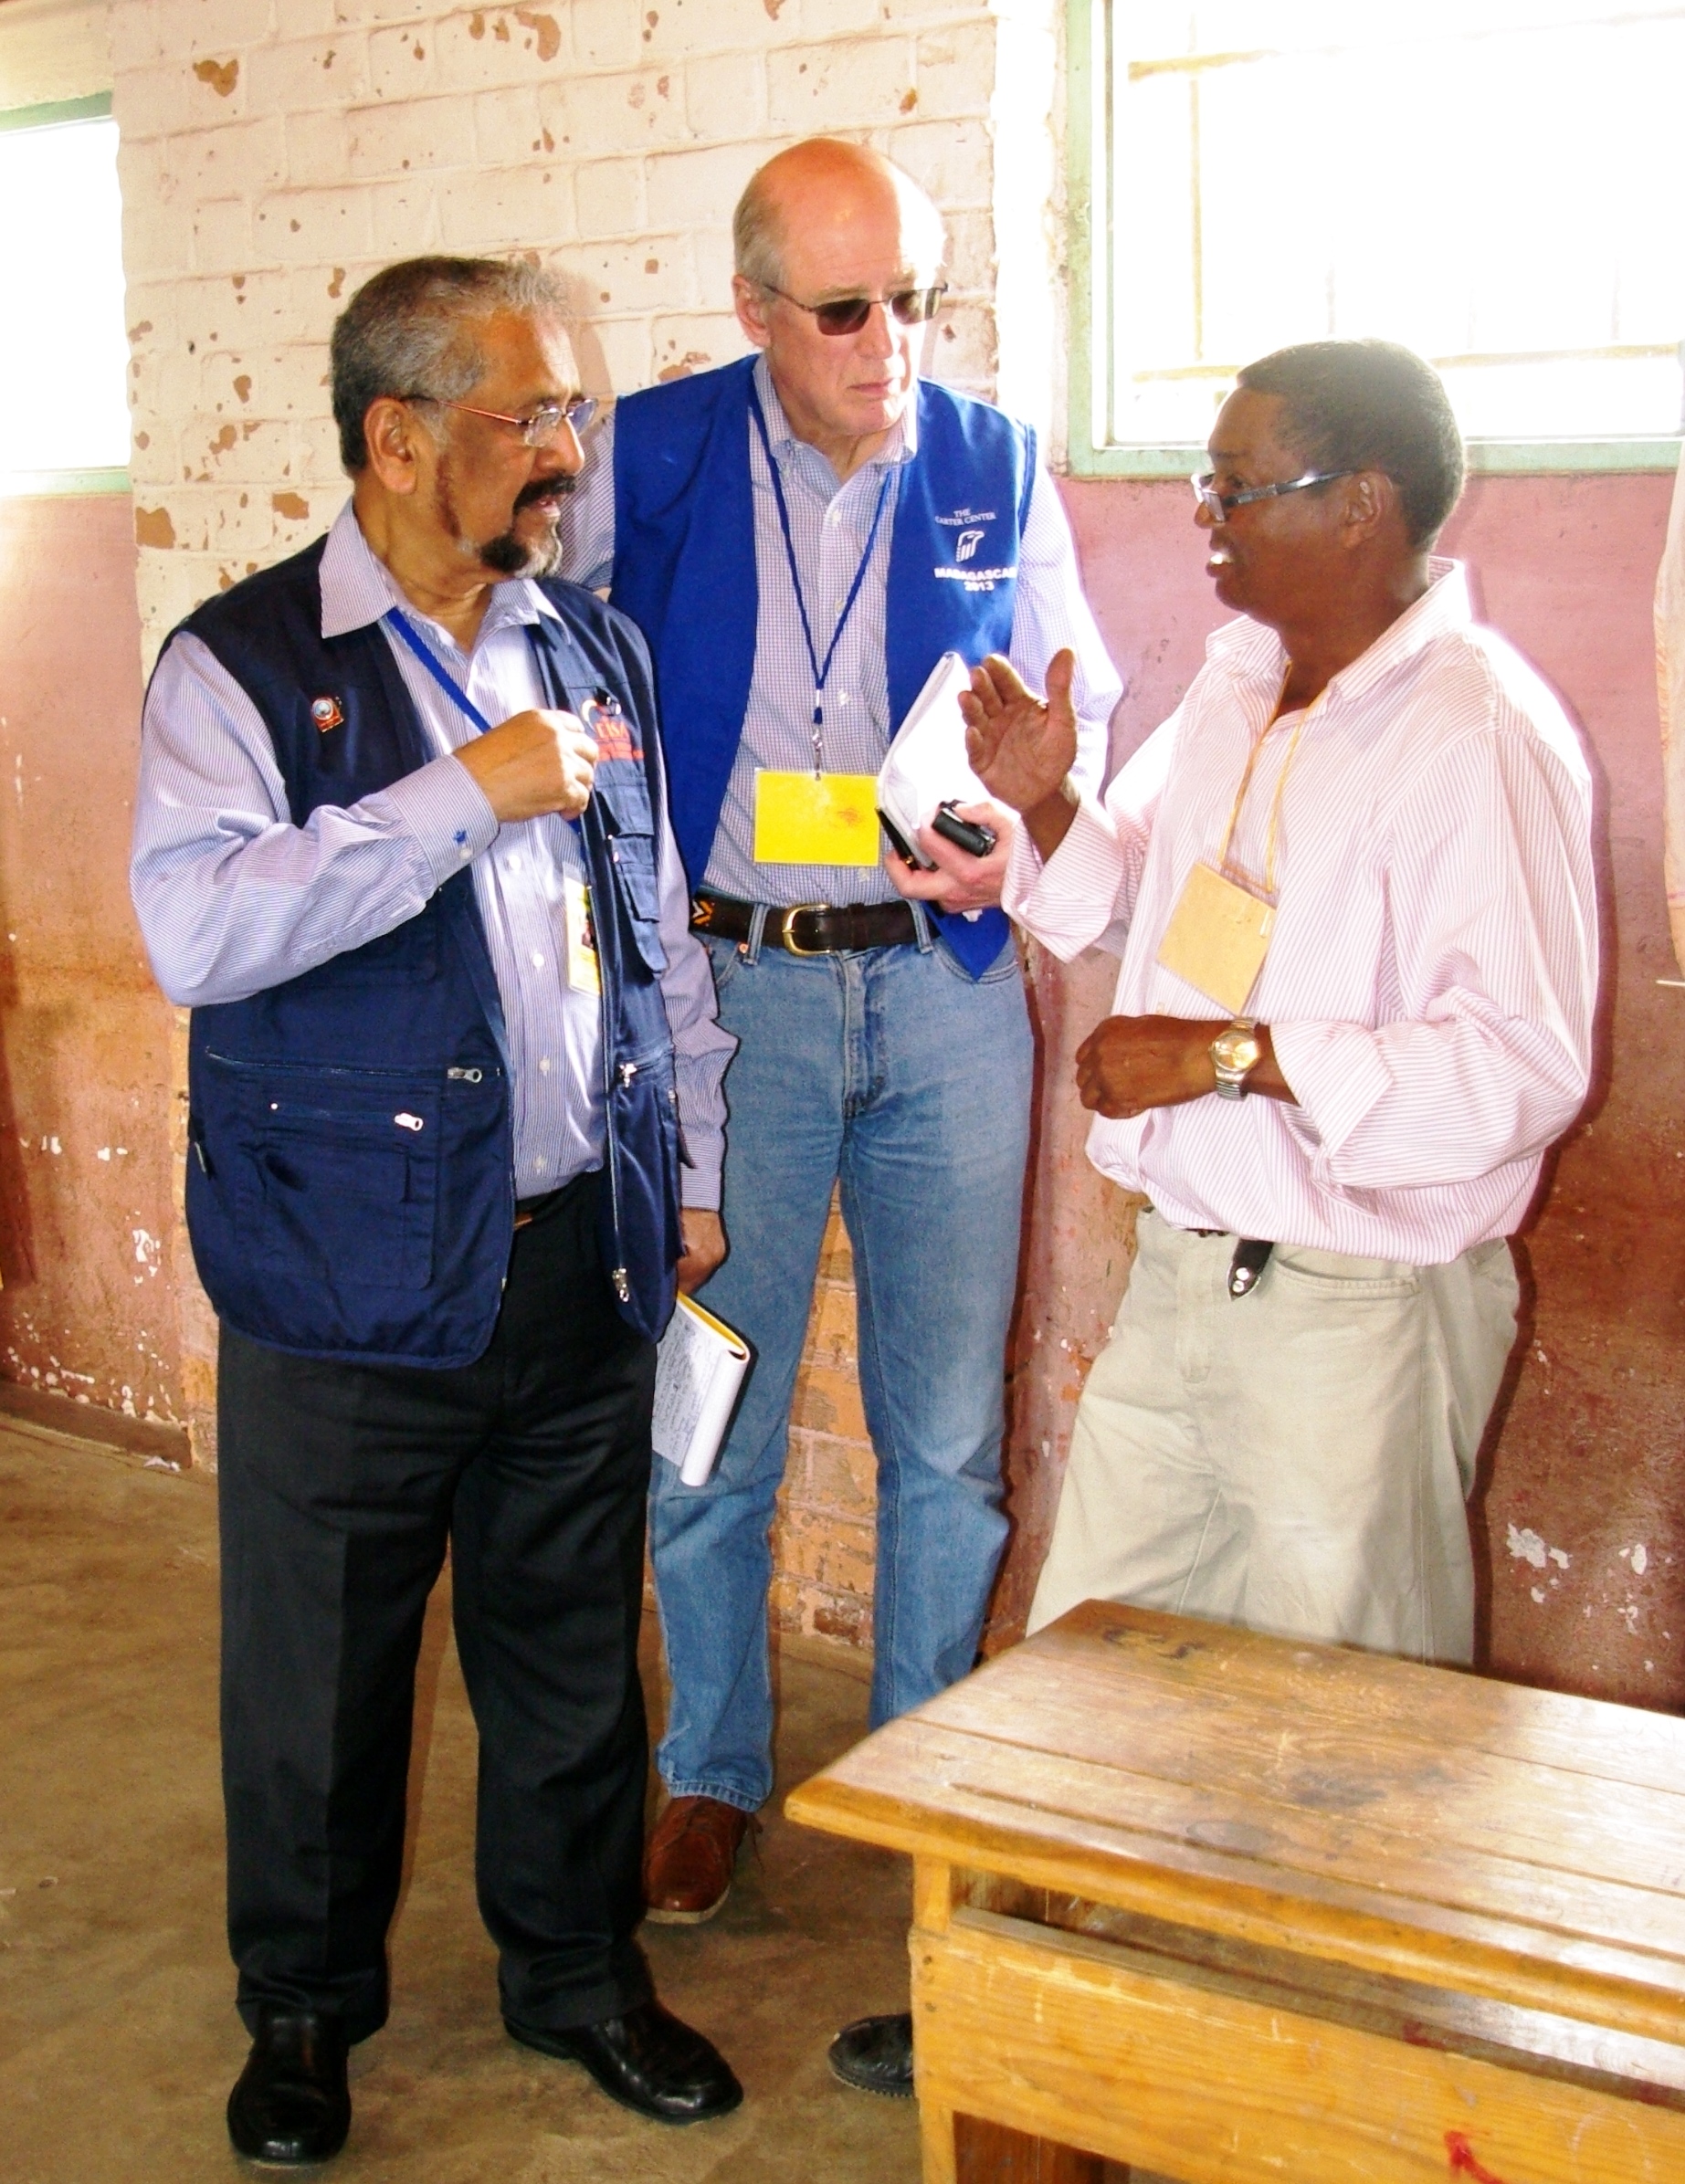 President Cassam Uteem, former president of Maritius (left), and Dr. John Stremlau of The Carter Center speak with polling station staff on election day.